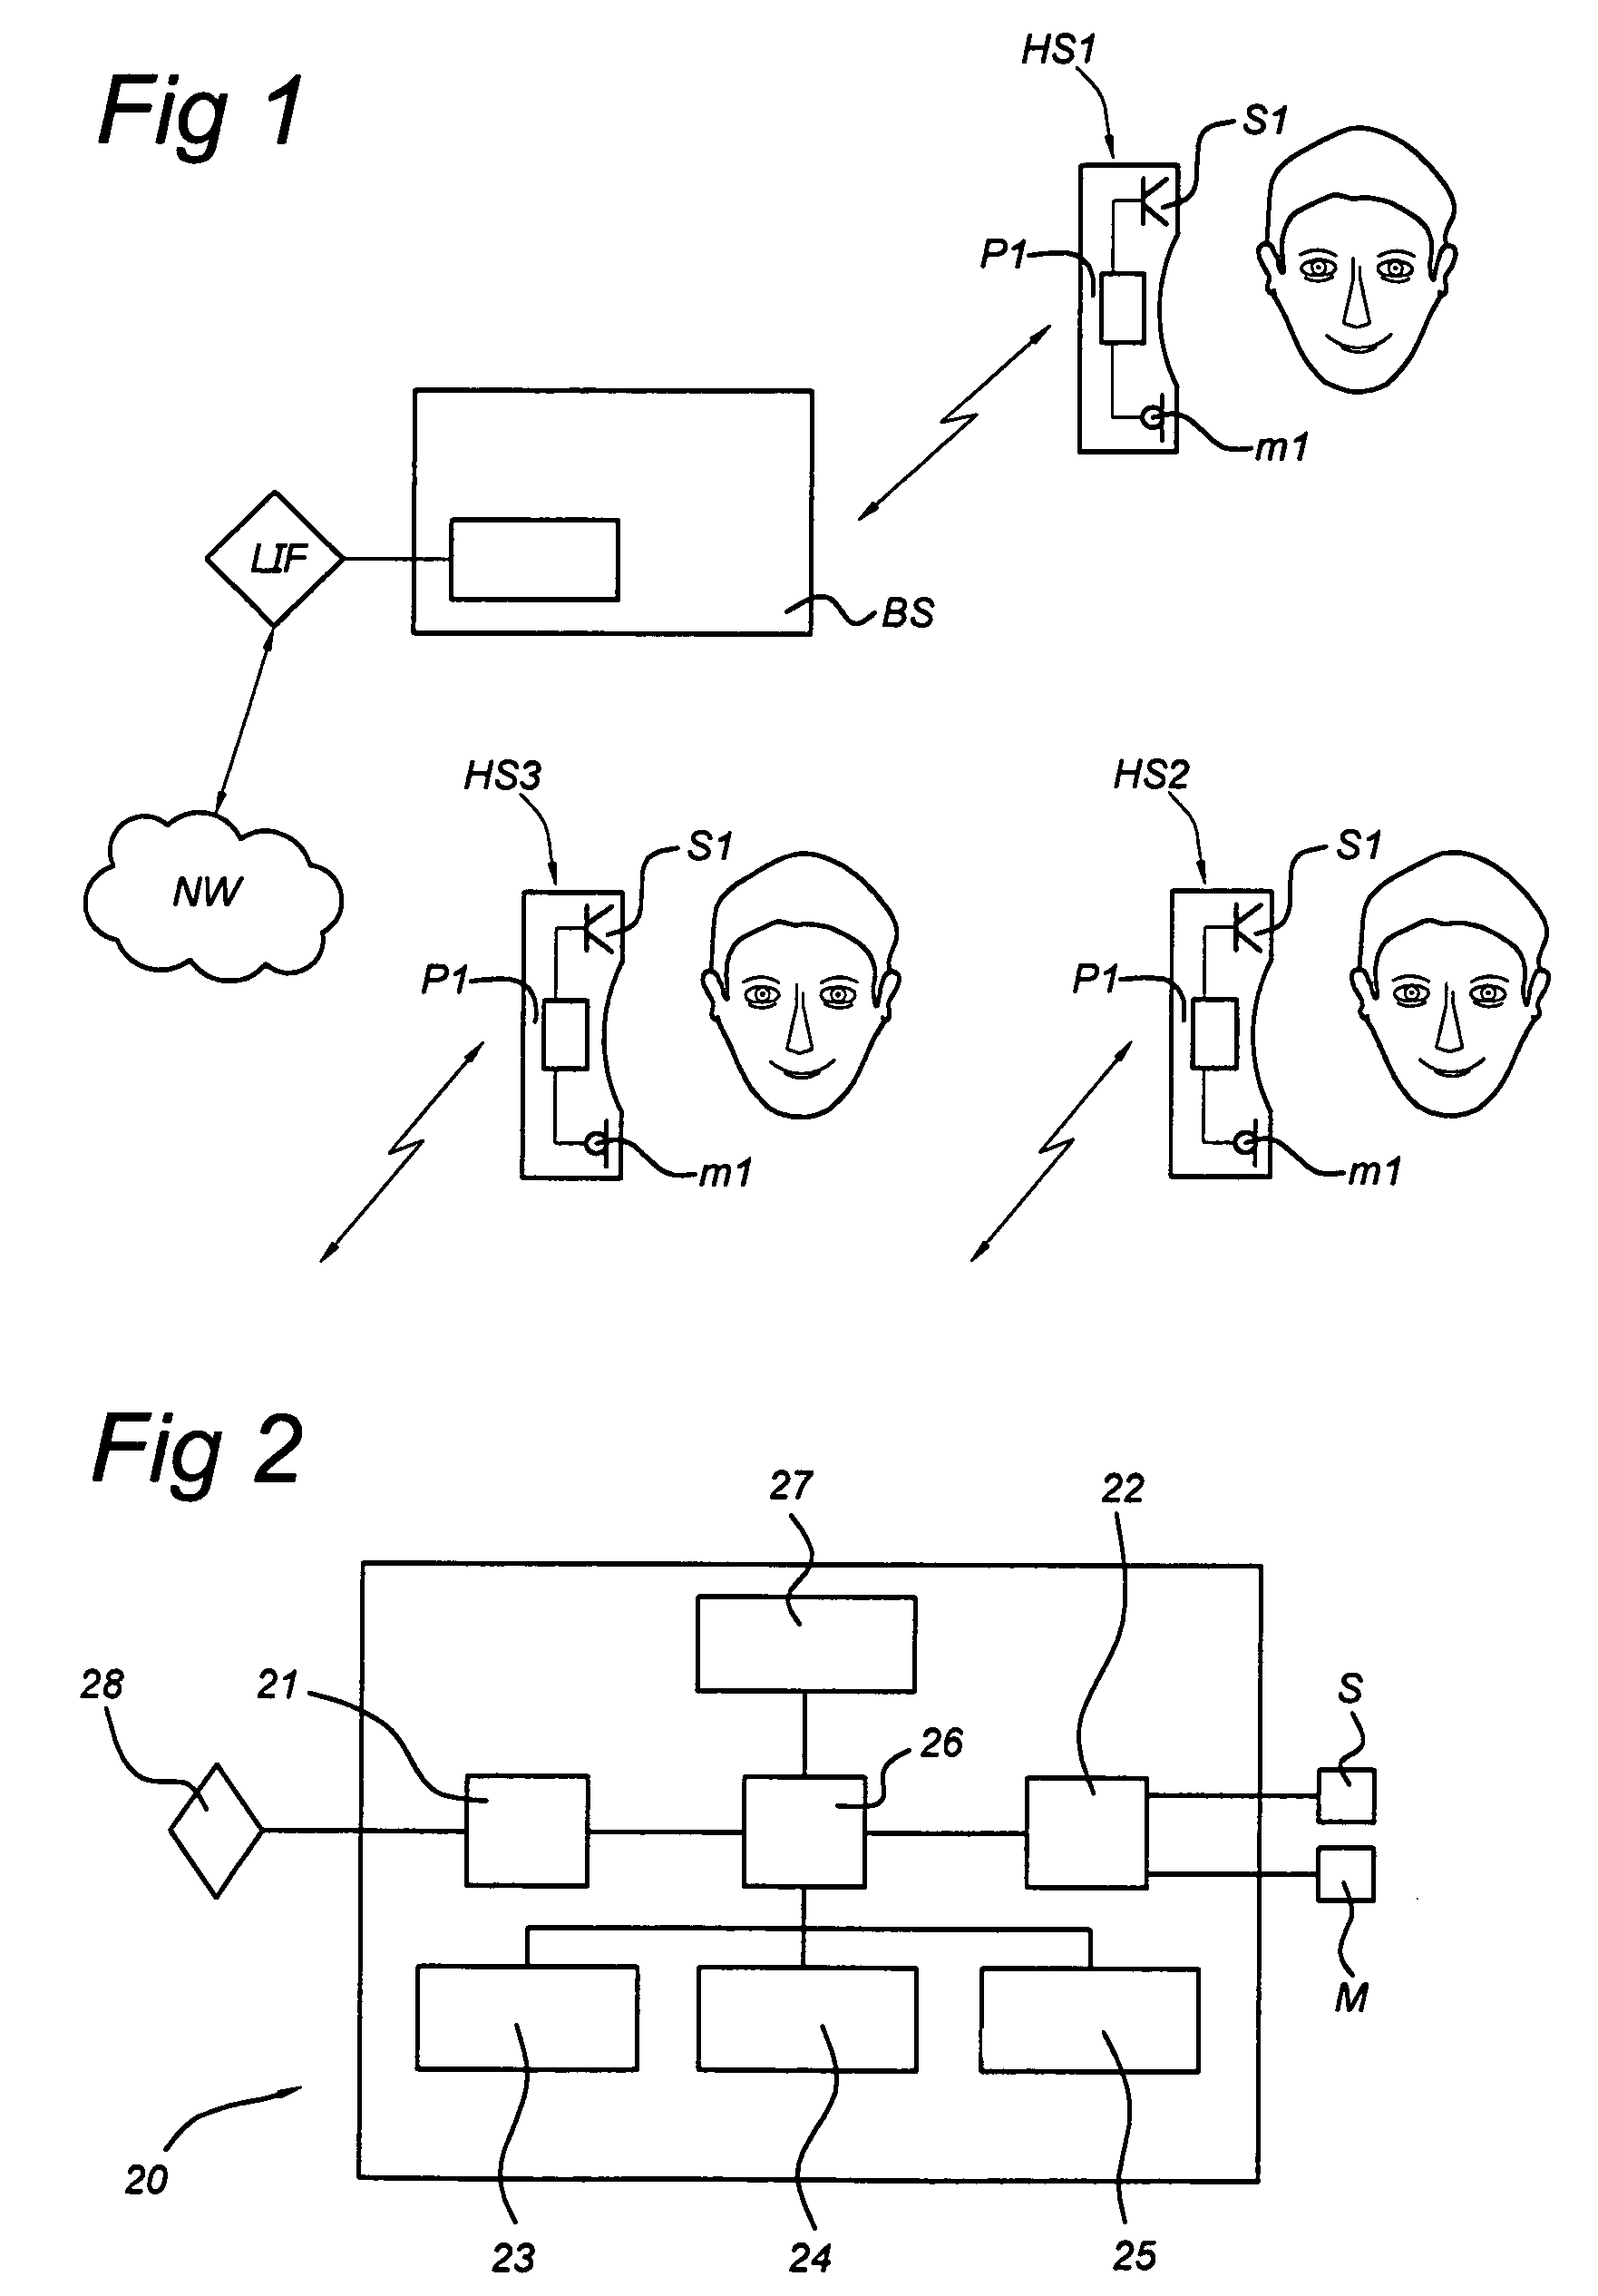 Voice audio processing method and device